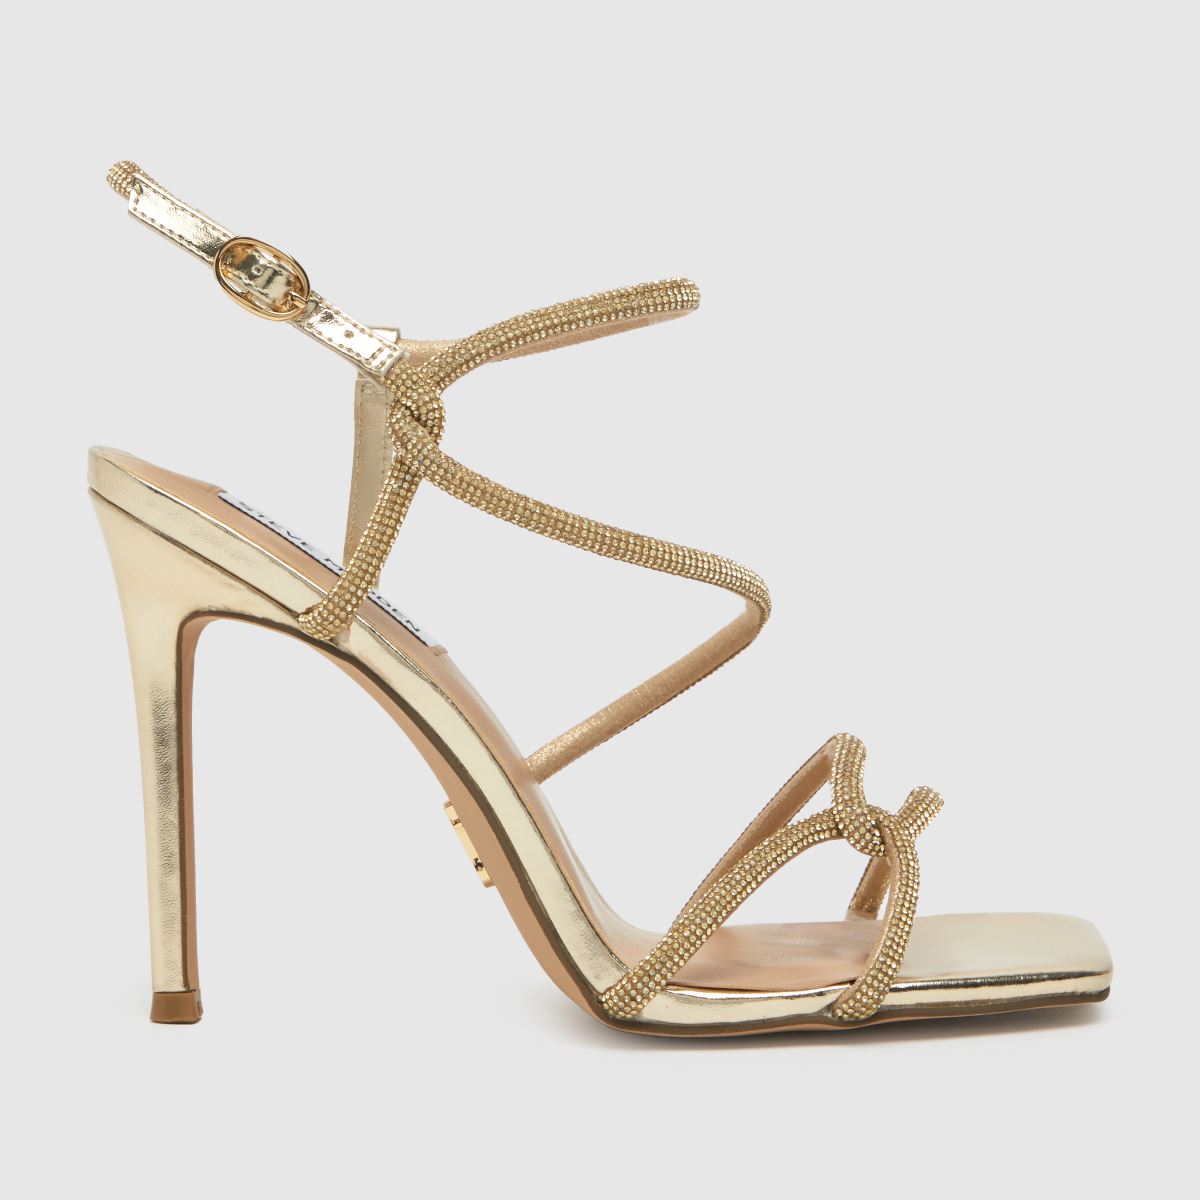 Why You Need These Gold Heels in Your Collection